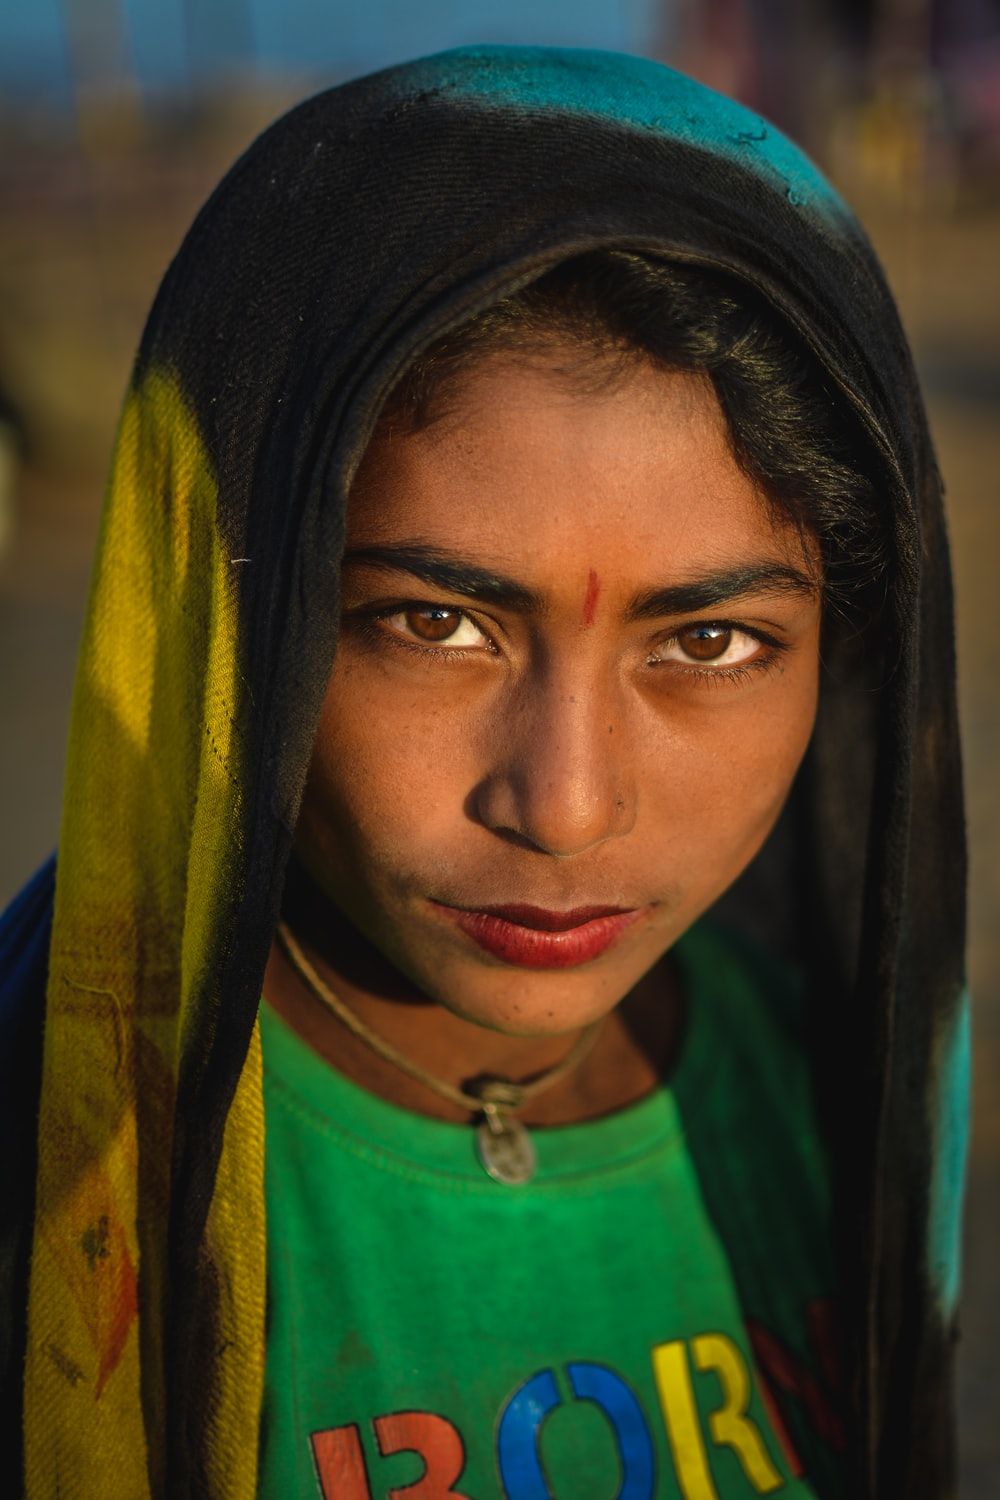 Village Girl Picture. Download Free Image